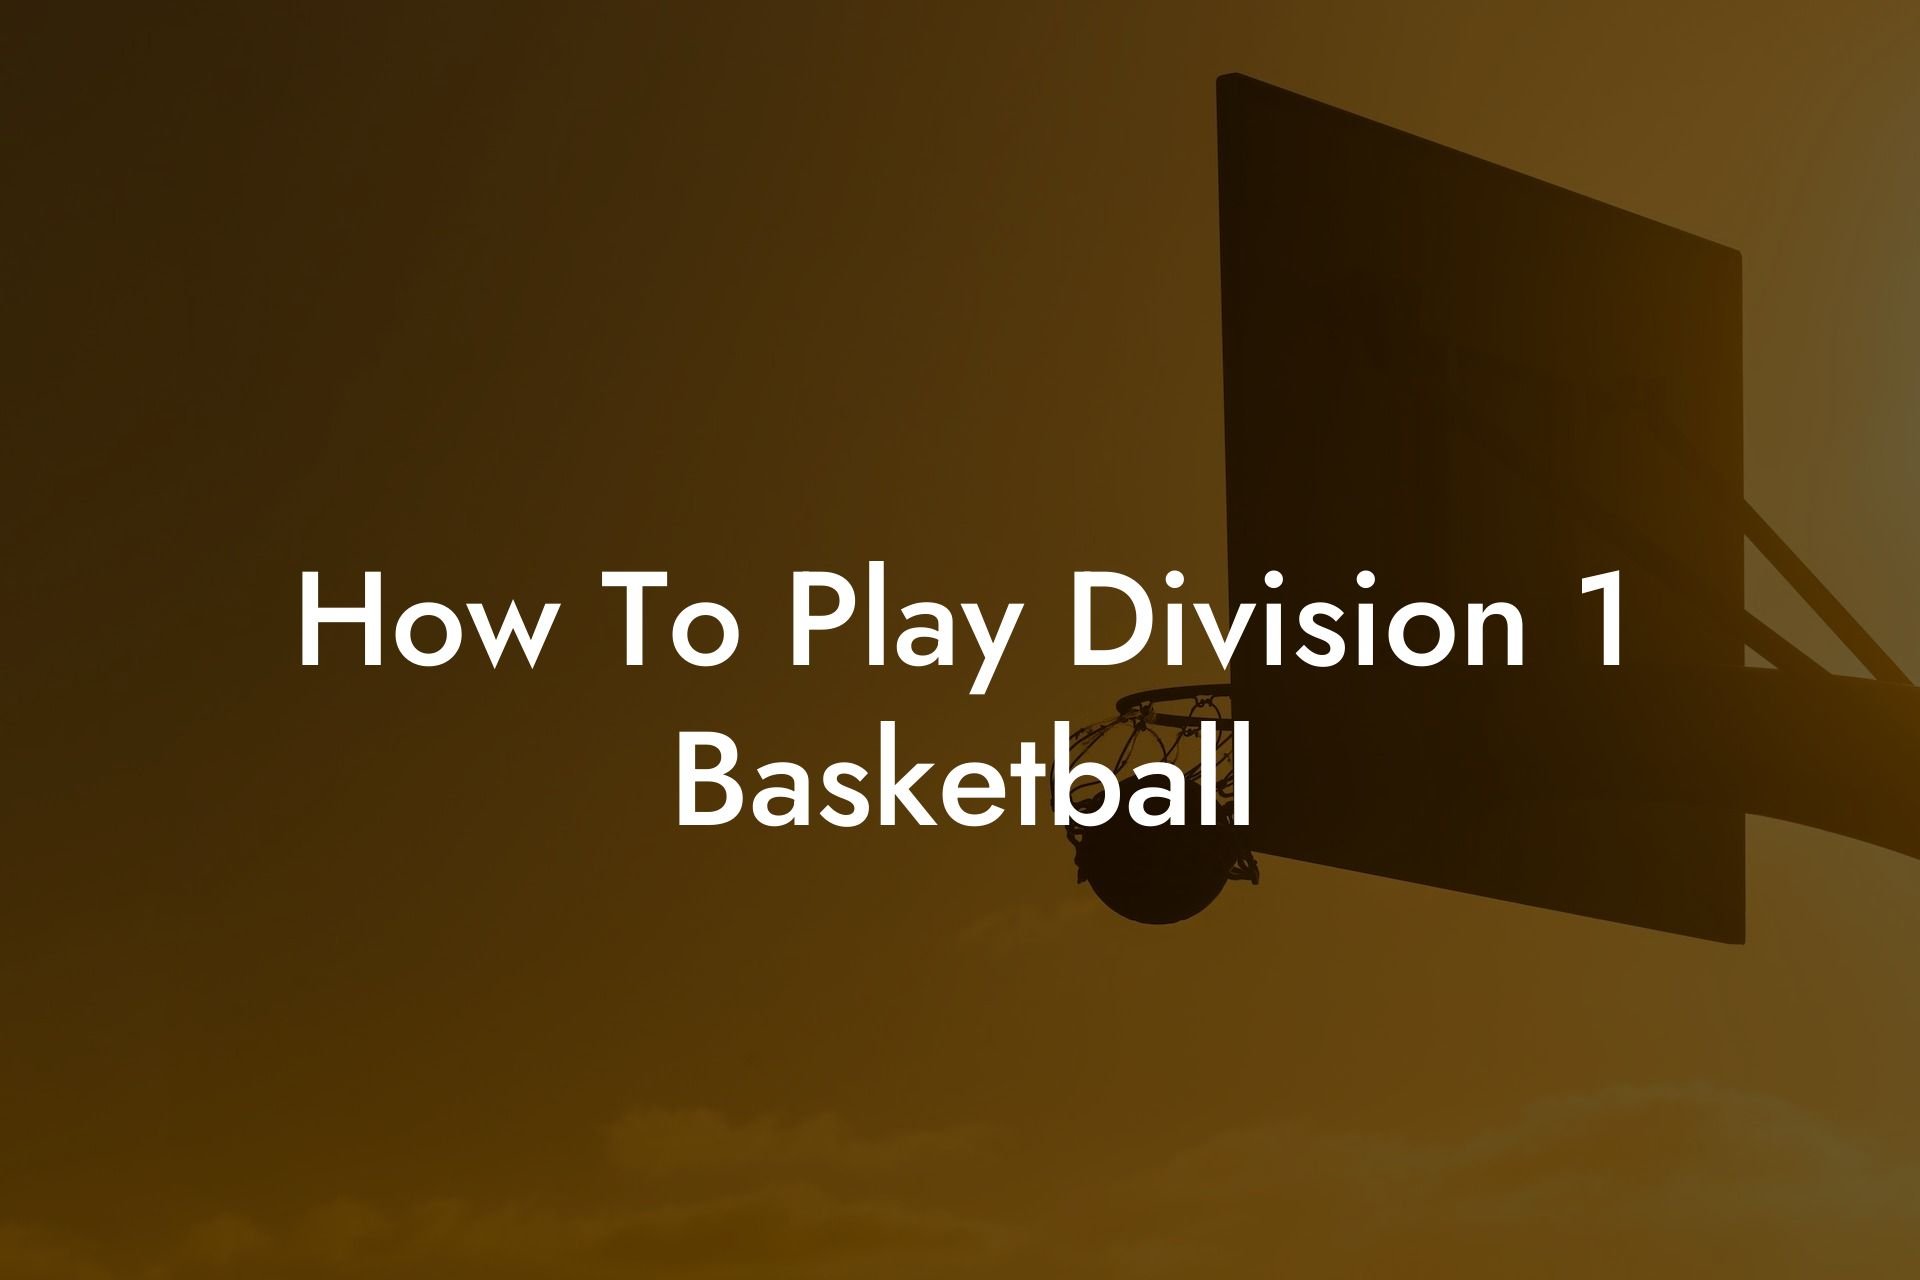 How To Play Division 1 Basketball - Triple Threat Tactics | Everything ...